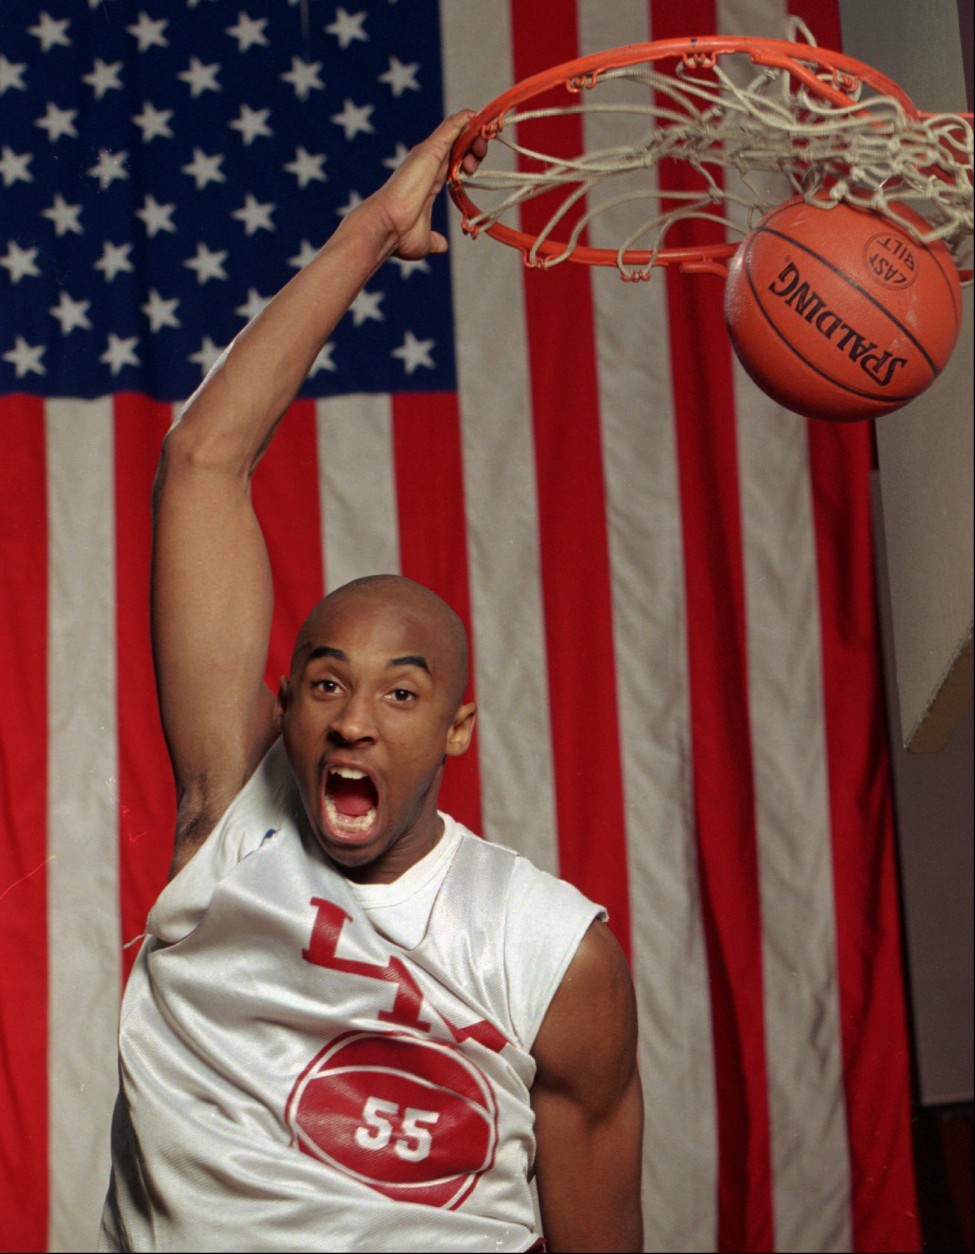 FILE--With a large flag as a backdrop, Kobe Bryant dunks the ball at his Lower Merion, Pa. high school gym during a practice Friday, Jan. 19, 1996. Bryant was chosen by the Charlotte Hornets in the first round of the NBA draft Wednesday June 26, 1996 (AP Photo/rusty kennedy)